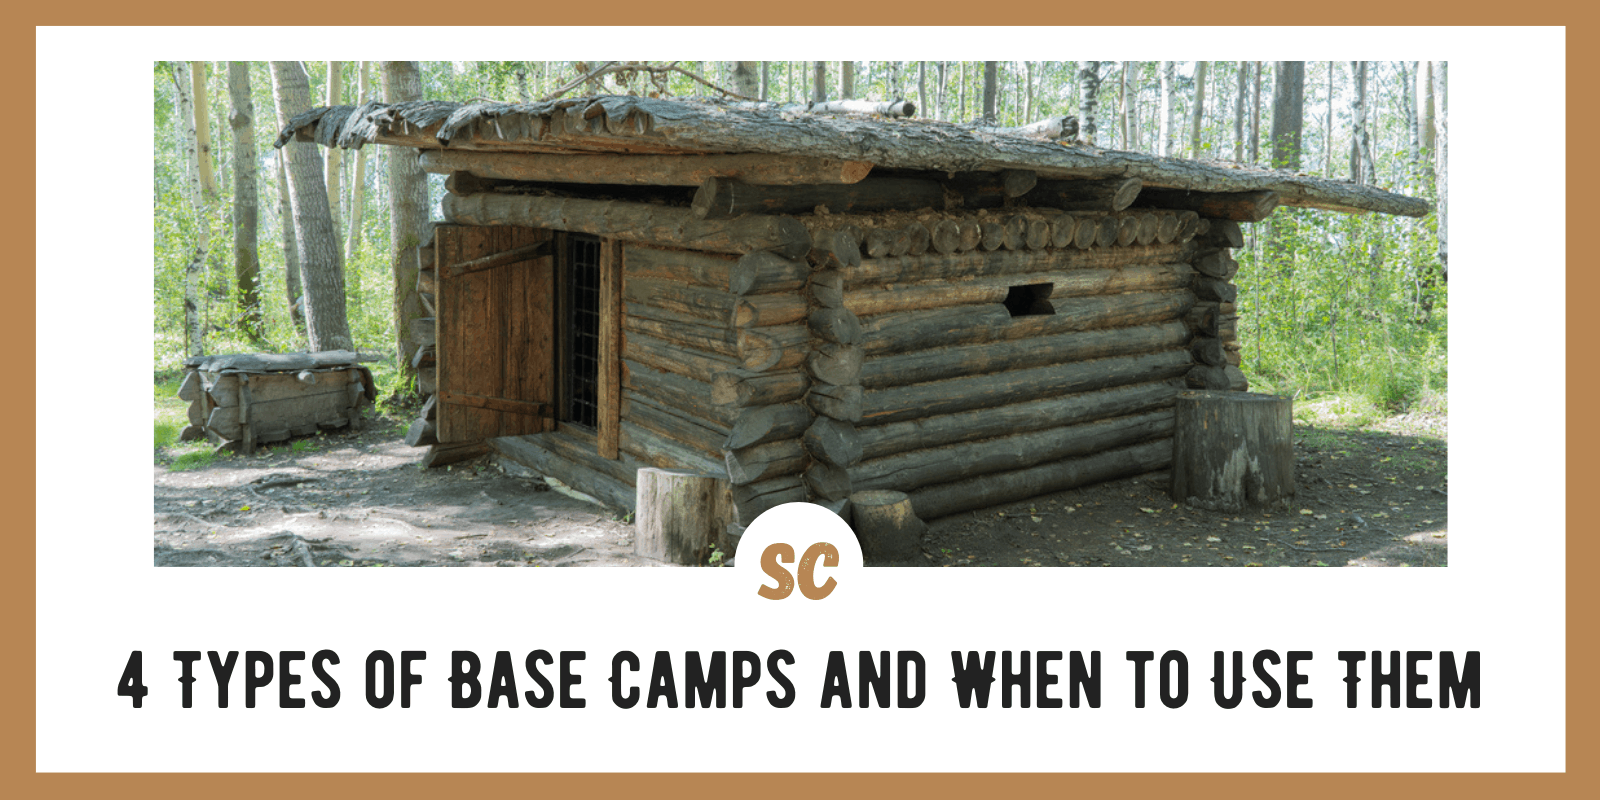 4 Types of Base Camps and When to Use Them